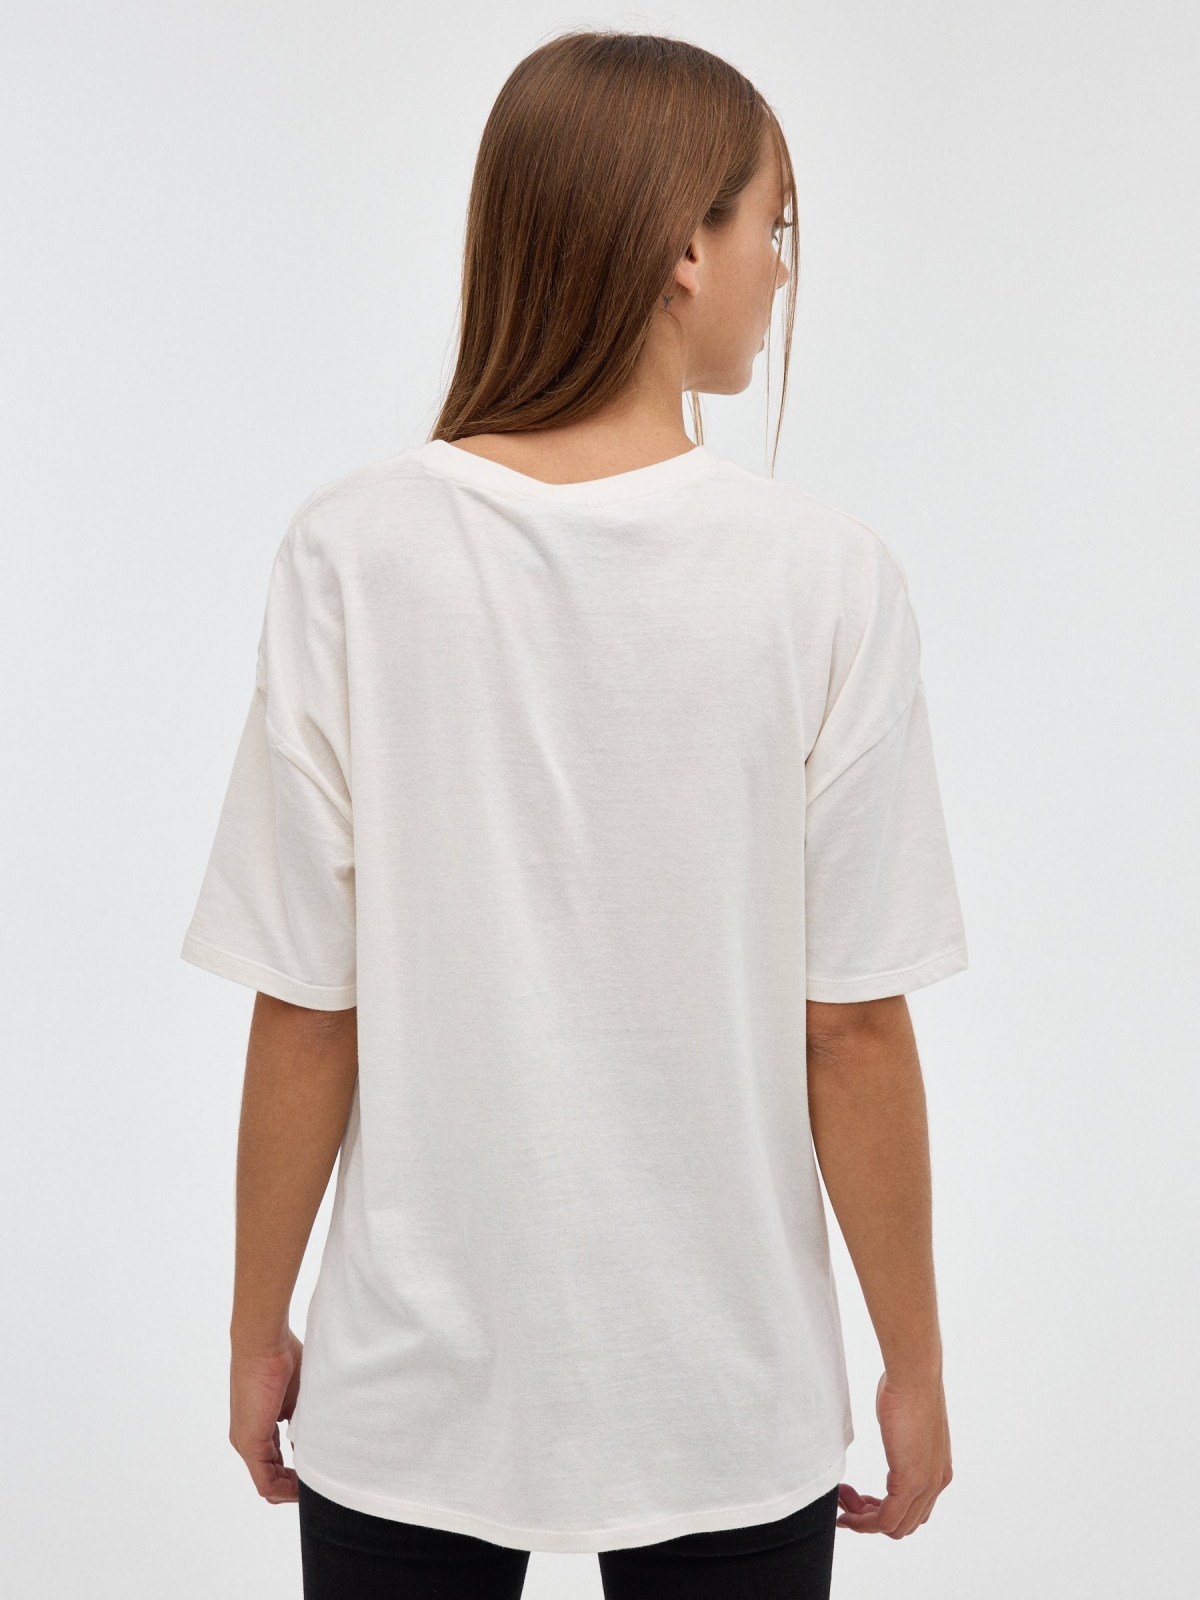 Hatsun oversized T-shirt off white middle back view